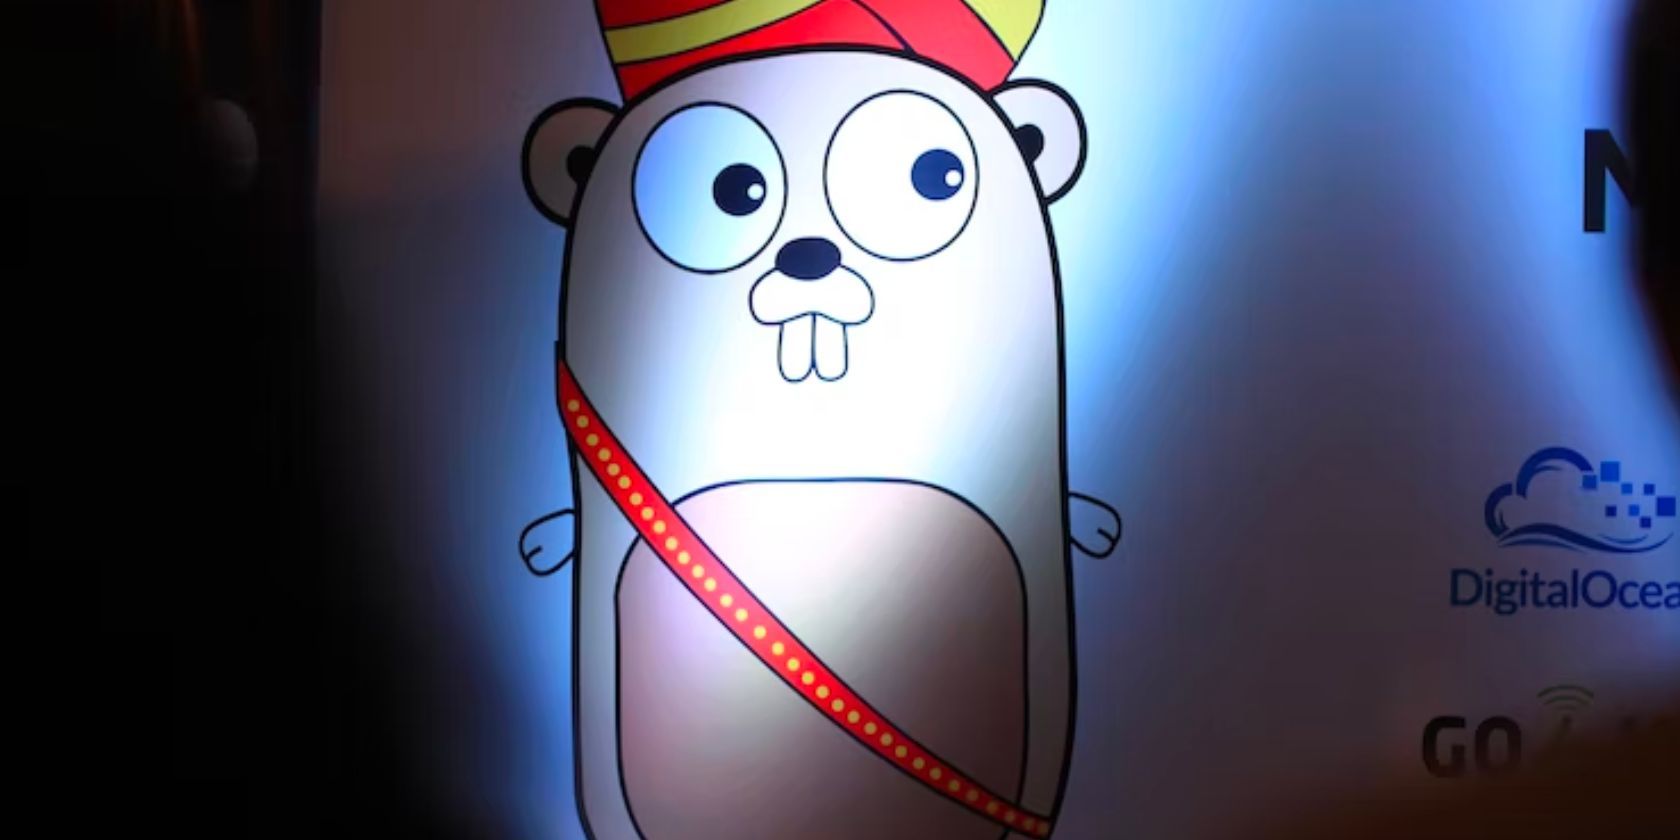 The Go programming language mascot, a gopher with prominent front teeth and large eyes